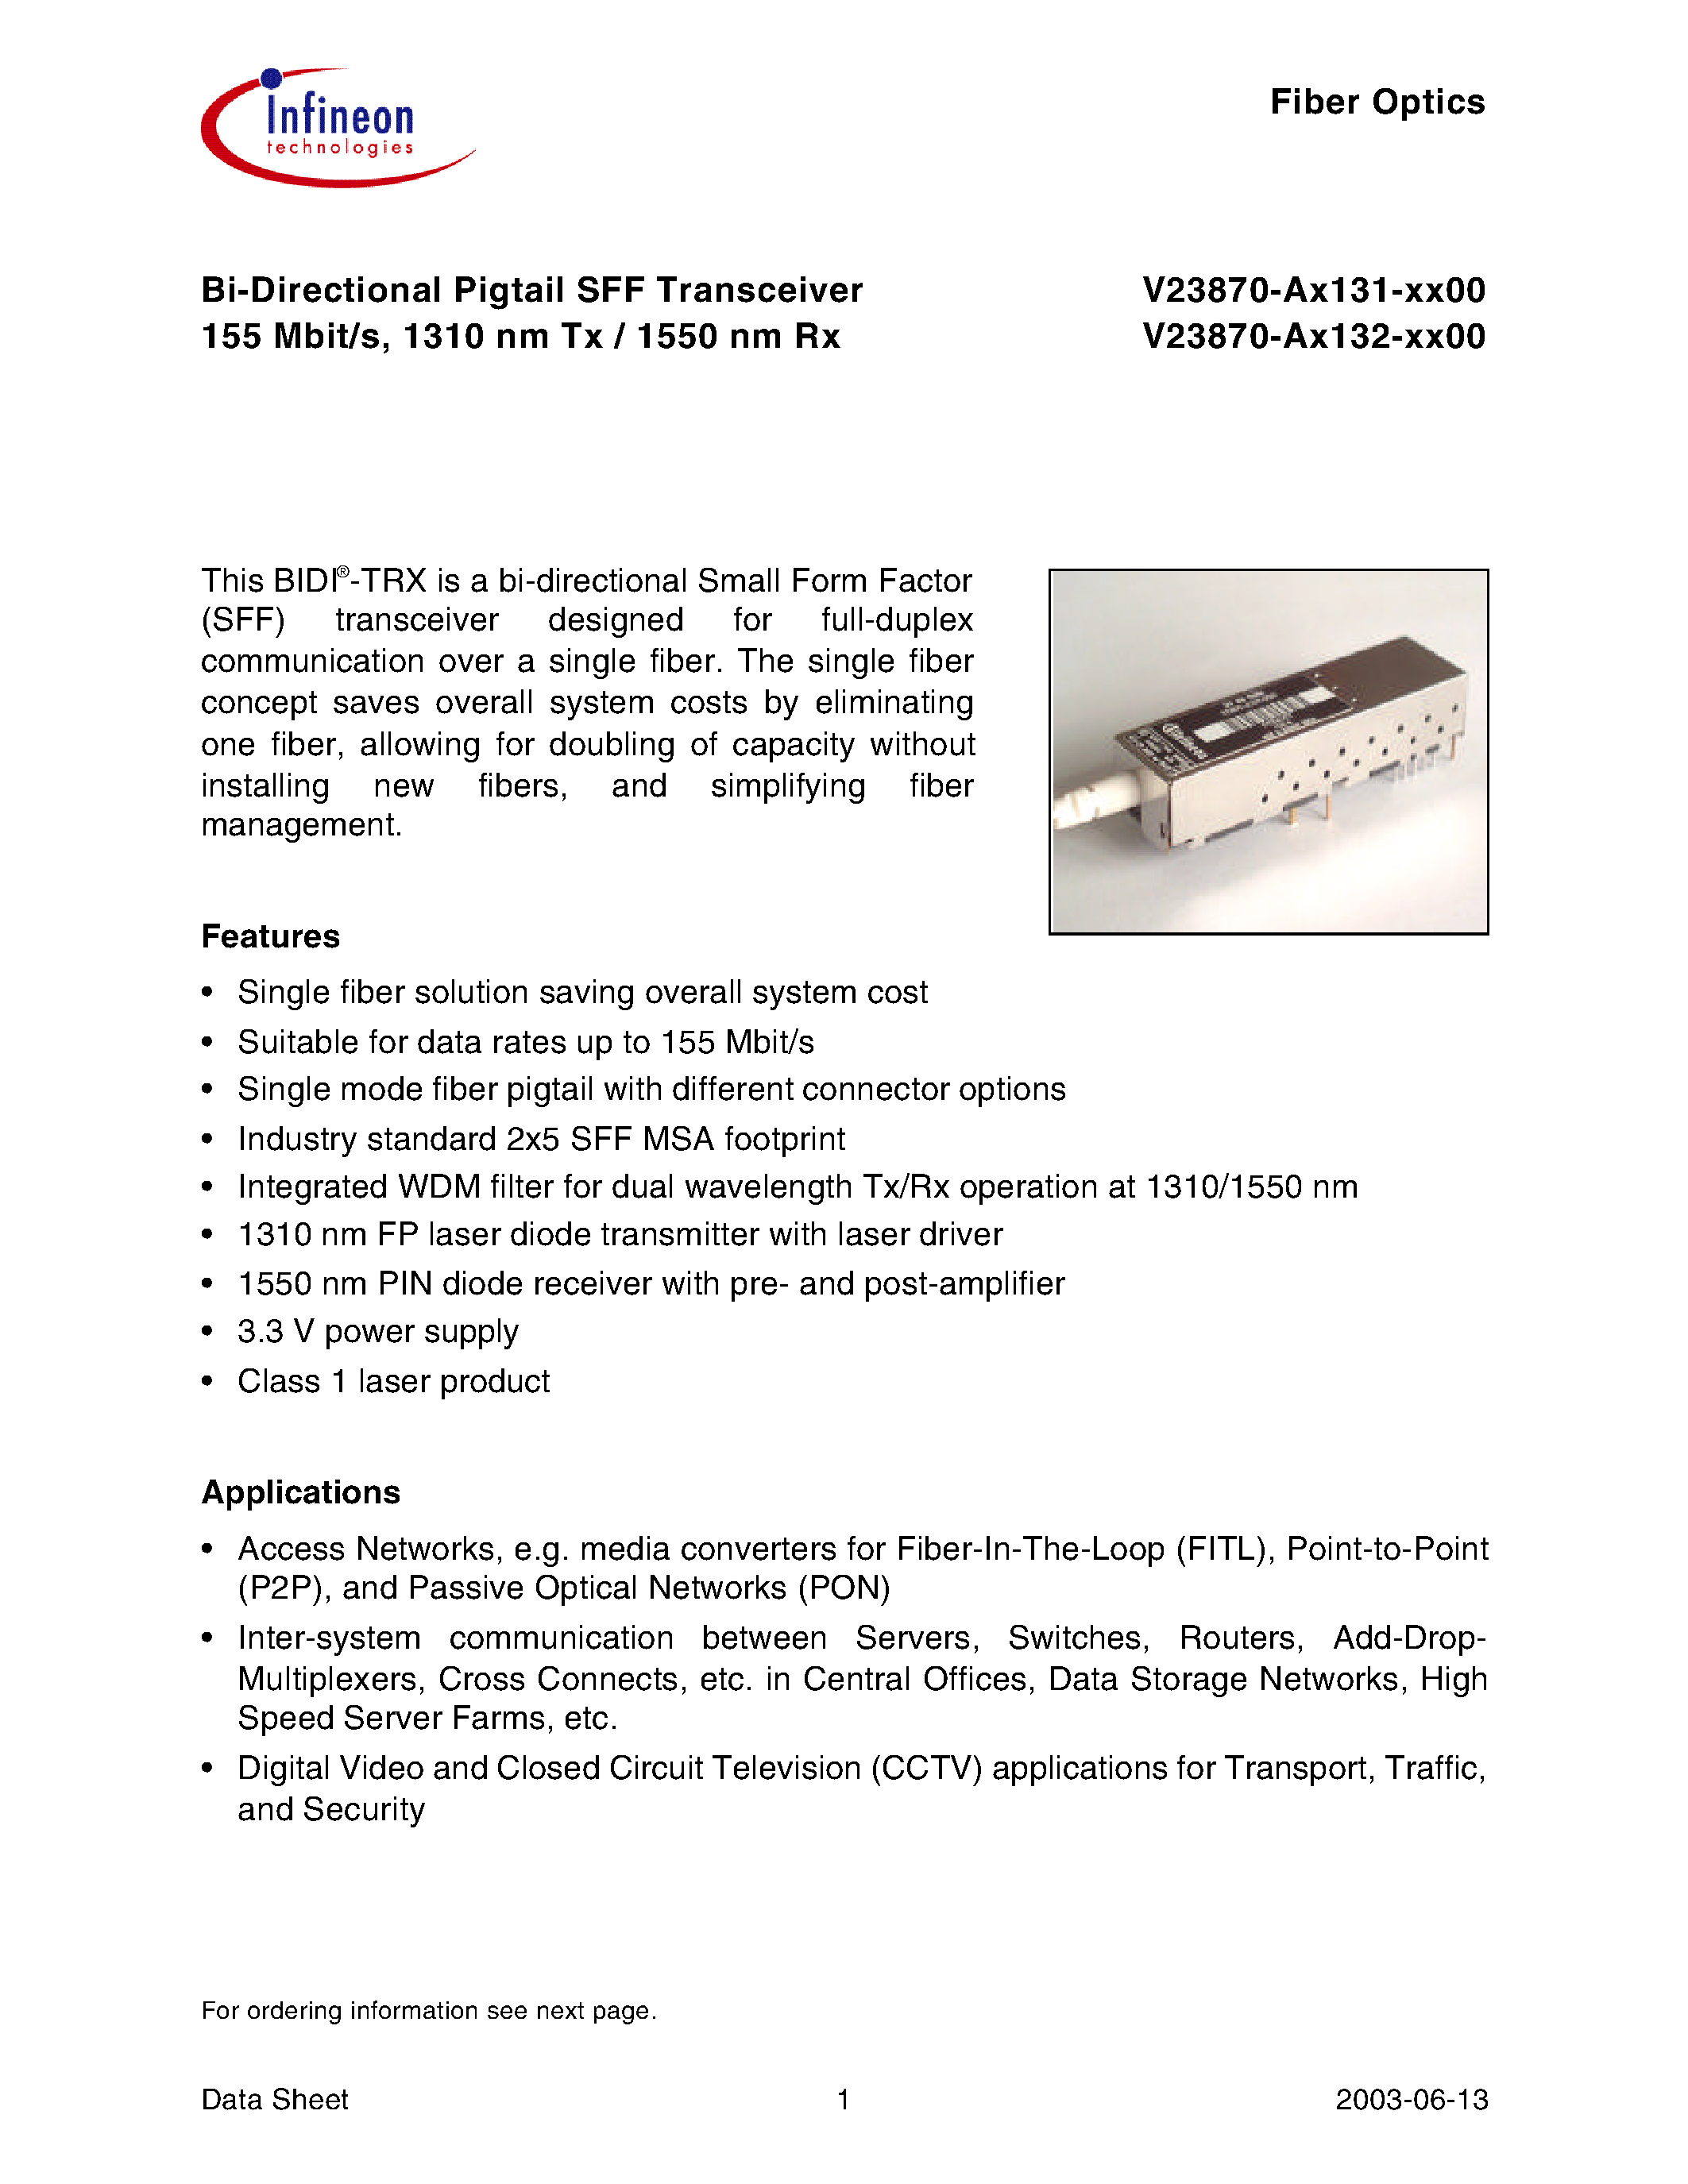 Datasheet V23870-A3132-B600 - Bi-Directional Pigtail SFF Transceiver 155 Mbit/s/ 1310 nm Tx / 1550 nm Rx page 1